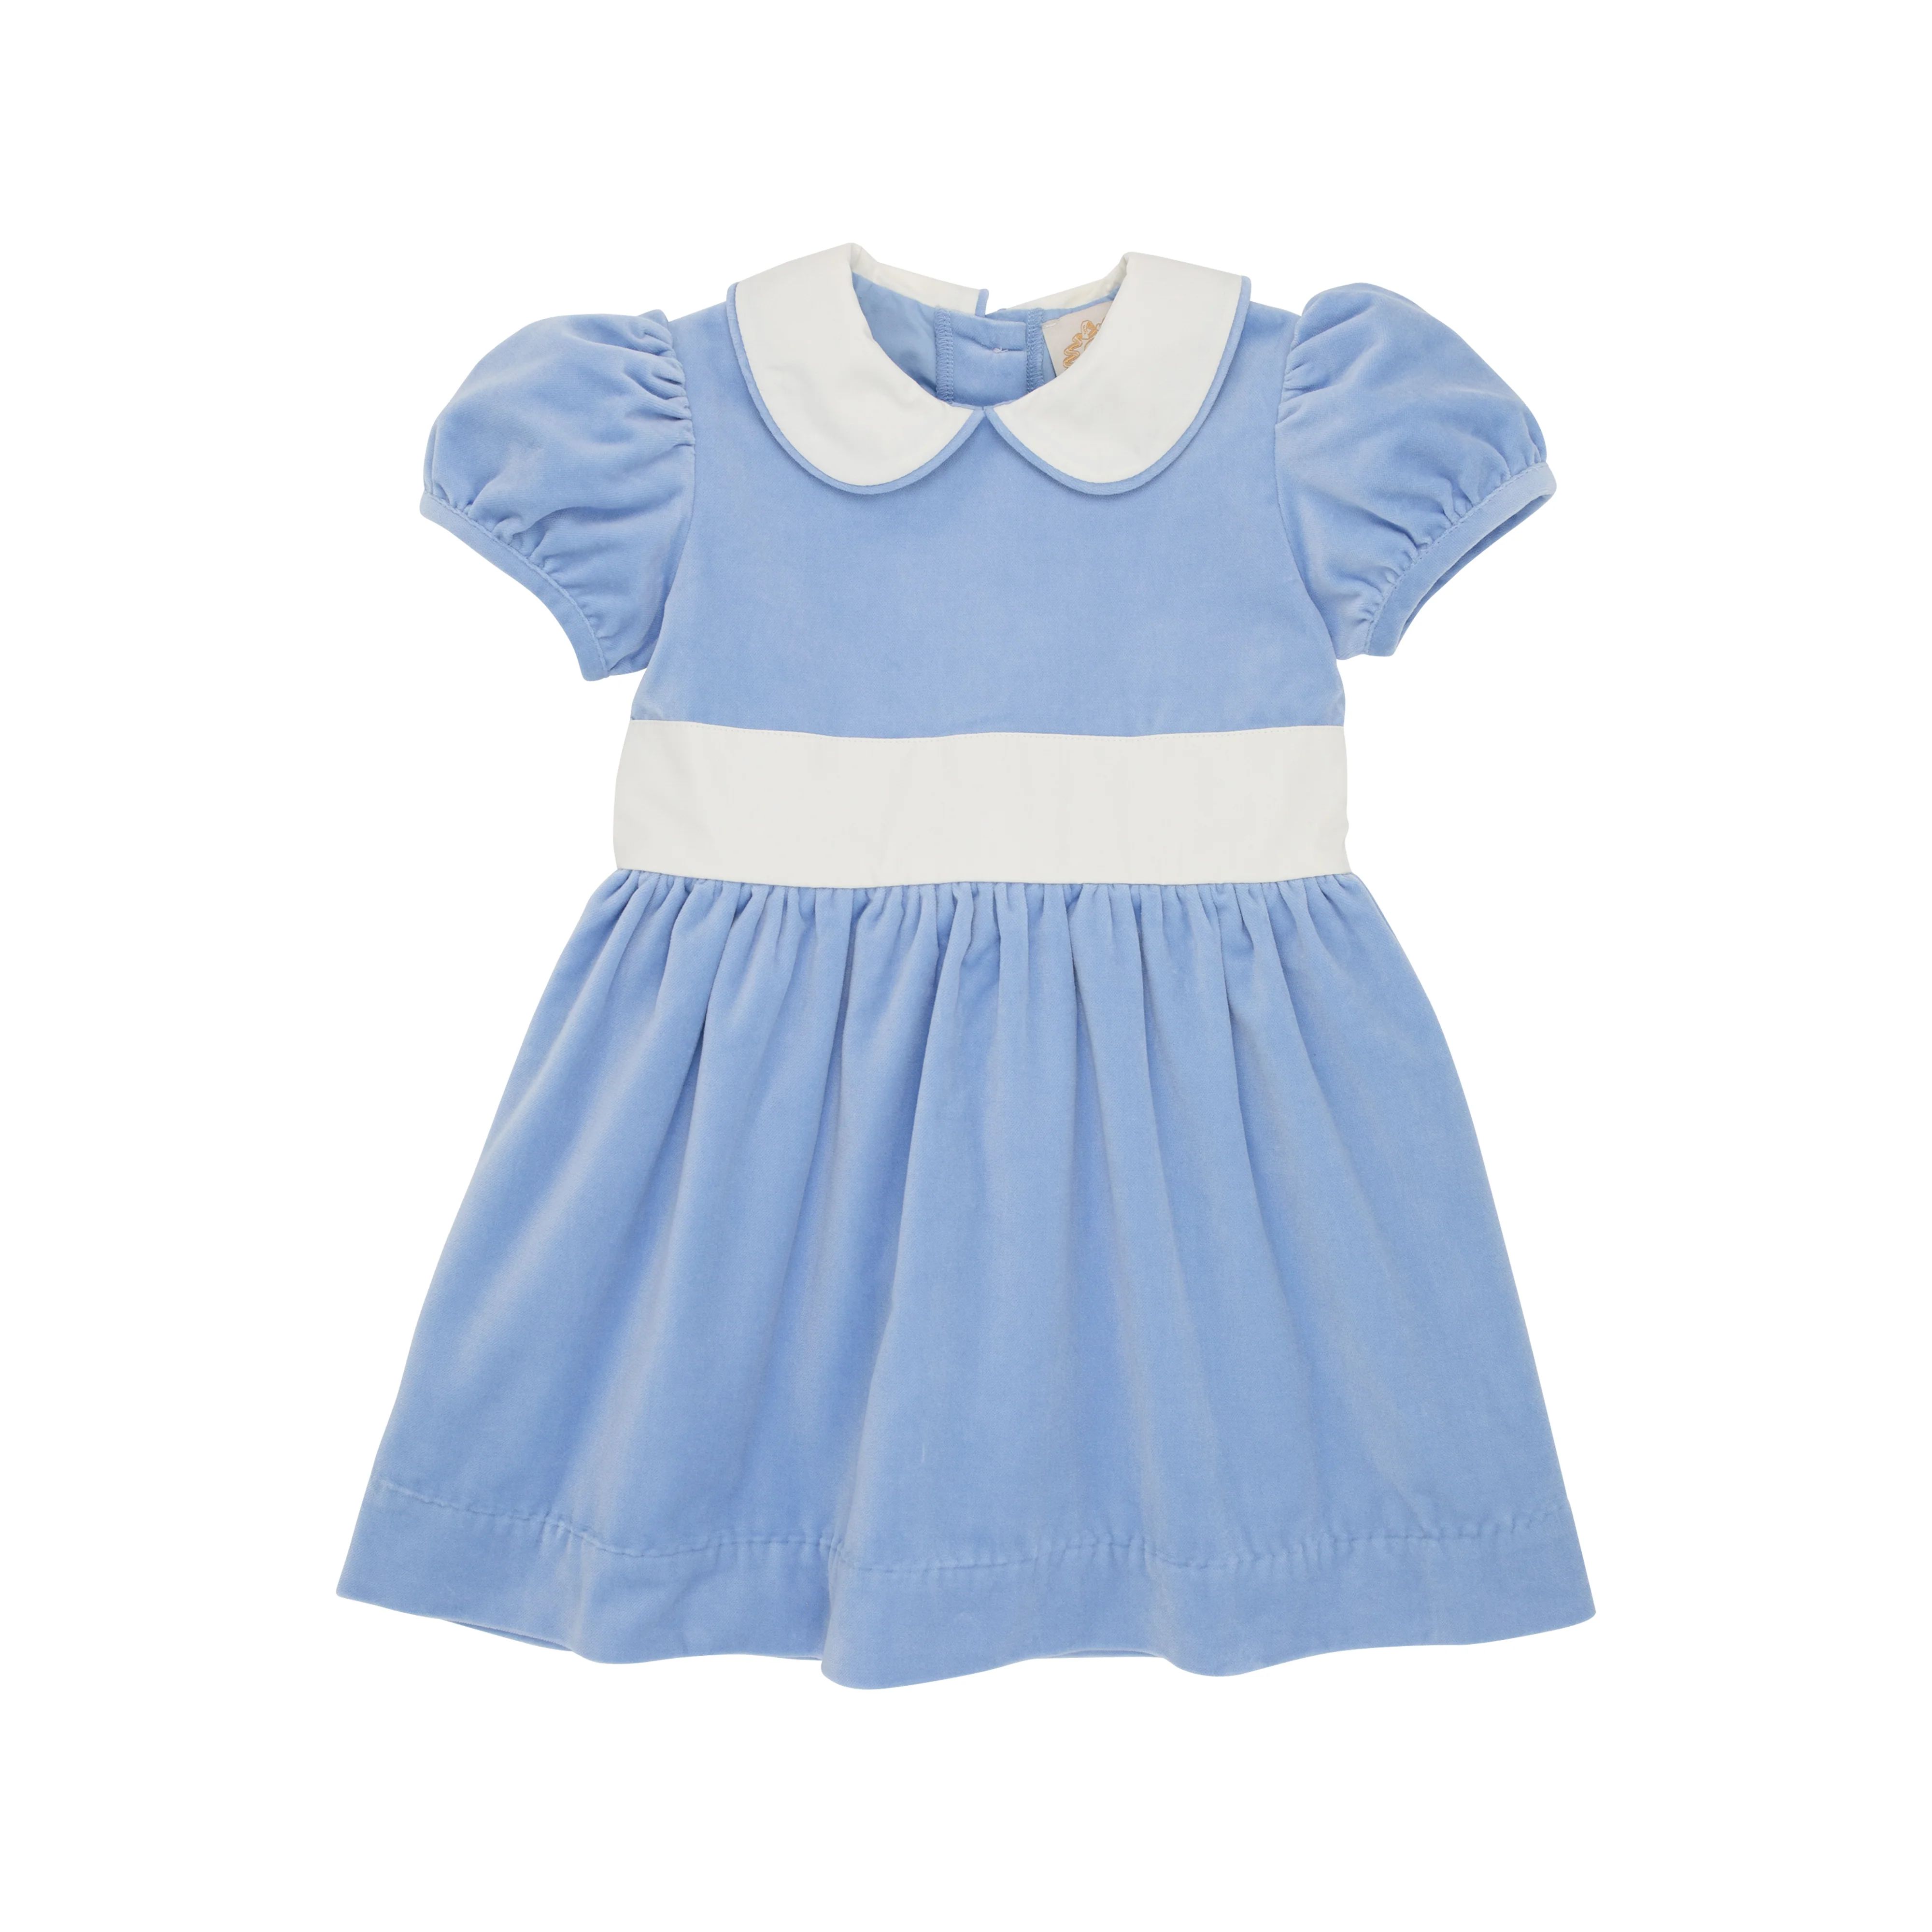 Cindy Lou Sash Dress (Velveteen) - Beale Street Blue with Palmetto Pearl | The Beaufort Bonnet Company